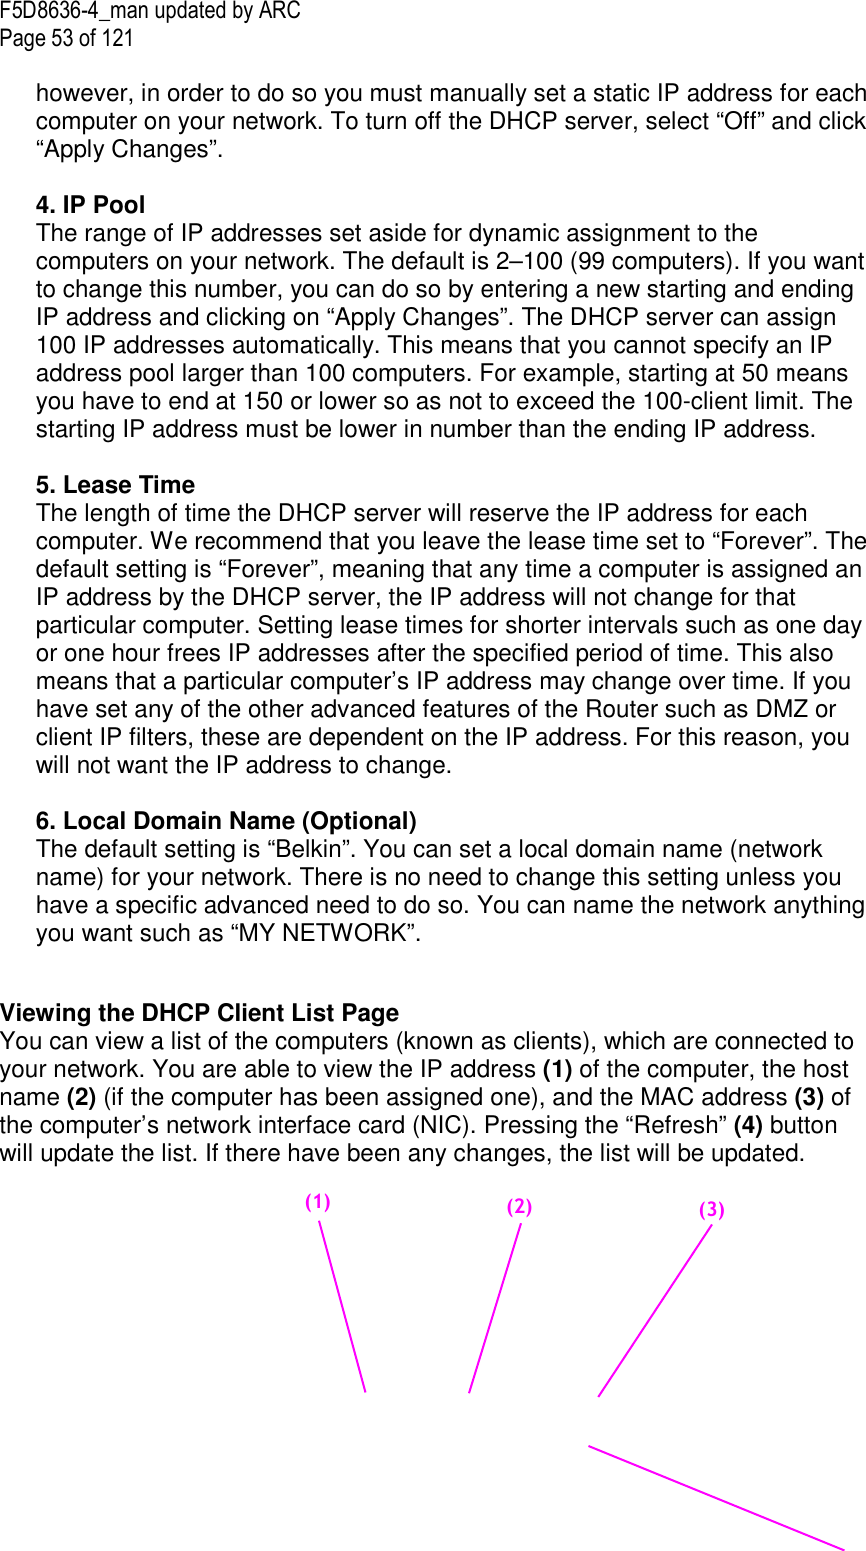 F5D8636-4_man updated by ARC Page 53 of 121  however, in order to do so you must manually set a static IP address for each computer on your network. To turn off the DHCP server, select “Off” and click “Apply Changes”.  4. IP Pool  The range of IP addresses set aside for dynamic assignment to the computers on your network. The default is 2–100 (99 computers). If you want to change this number, you can do so by entering a new starting and ending IP address and clicking on “Apply Changes”. The DHCP server can assign 100 IP addresses automatically. This means that you cannot specify an IP address pool larger than 100 computers. For example, starting at 50 means you have to end at 150 or lower so as not to exceed the 100-client limit. The starting IP address must be lower in number than the ending IP address.  5. Lease Time  The length of time the DHCP server will reserve the IP address for each computer. We recommend that you leave the lease time set to “Forever”. The default setting is “Forever”, meaning that any time a computer is assigned an IP address by the DHCP server, the IP address will not change for that particular computer. Setting lease times for shorter intervals such as one day or one hour frees IP addresses after the specified period of time. This also means that a particular computer’s IP address may change over time. If you have set any of the other advanced features of the Router such as DMZ or client IP filters, these are dependent on the IP address. For this reason, you will not want the IP address to change.   6. Local Domain Name (Optional) The default setting is “Belkin”. You can set a local domain name (network name) for your network. There is no need to change this setting unless you have a specific advanced need to do so. You can name the network anything you want such as “MY NETWORK”.   Viewing the DHCP Client List Page You can view a list of the computers (known as clients), which are connected to your network. You are able to view the IP address (1) of the computer, the host name (2) (if the computer has been assigned one), and the MAC address (3) of the computer’s network interface card (NIC). Pressing the “Refresh” (4) button will update the list. If there have been any changes, the list will be updated.    (2)     (3)     (1)     